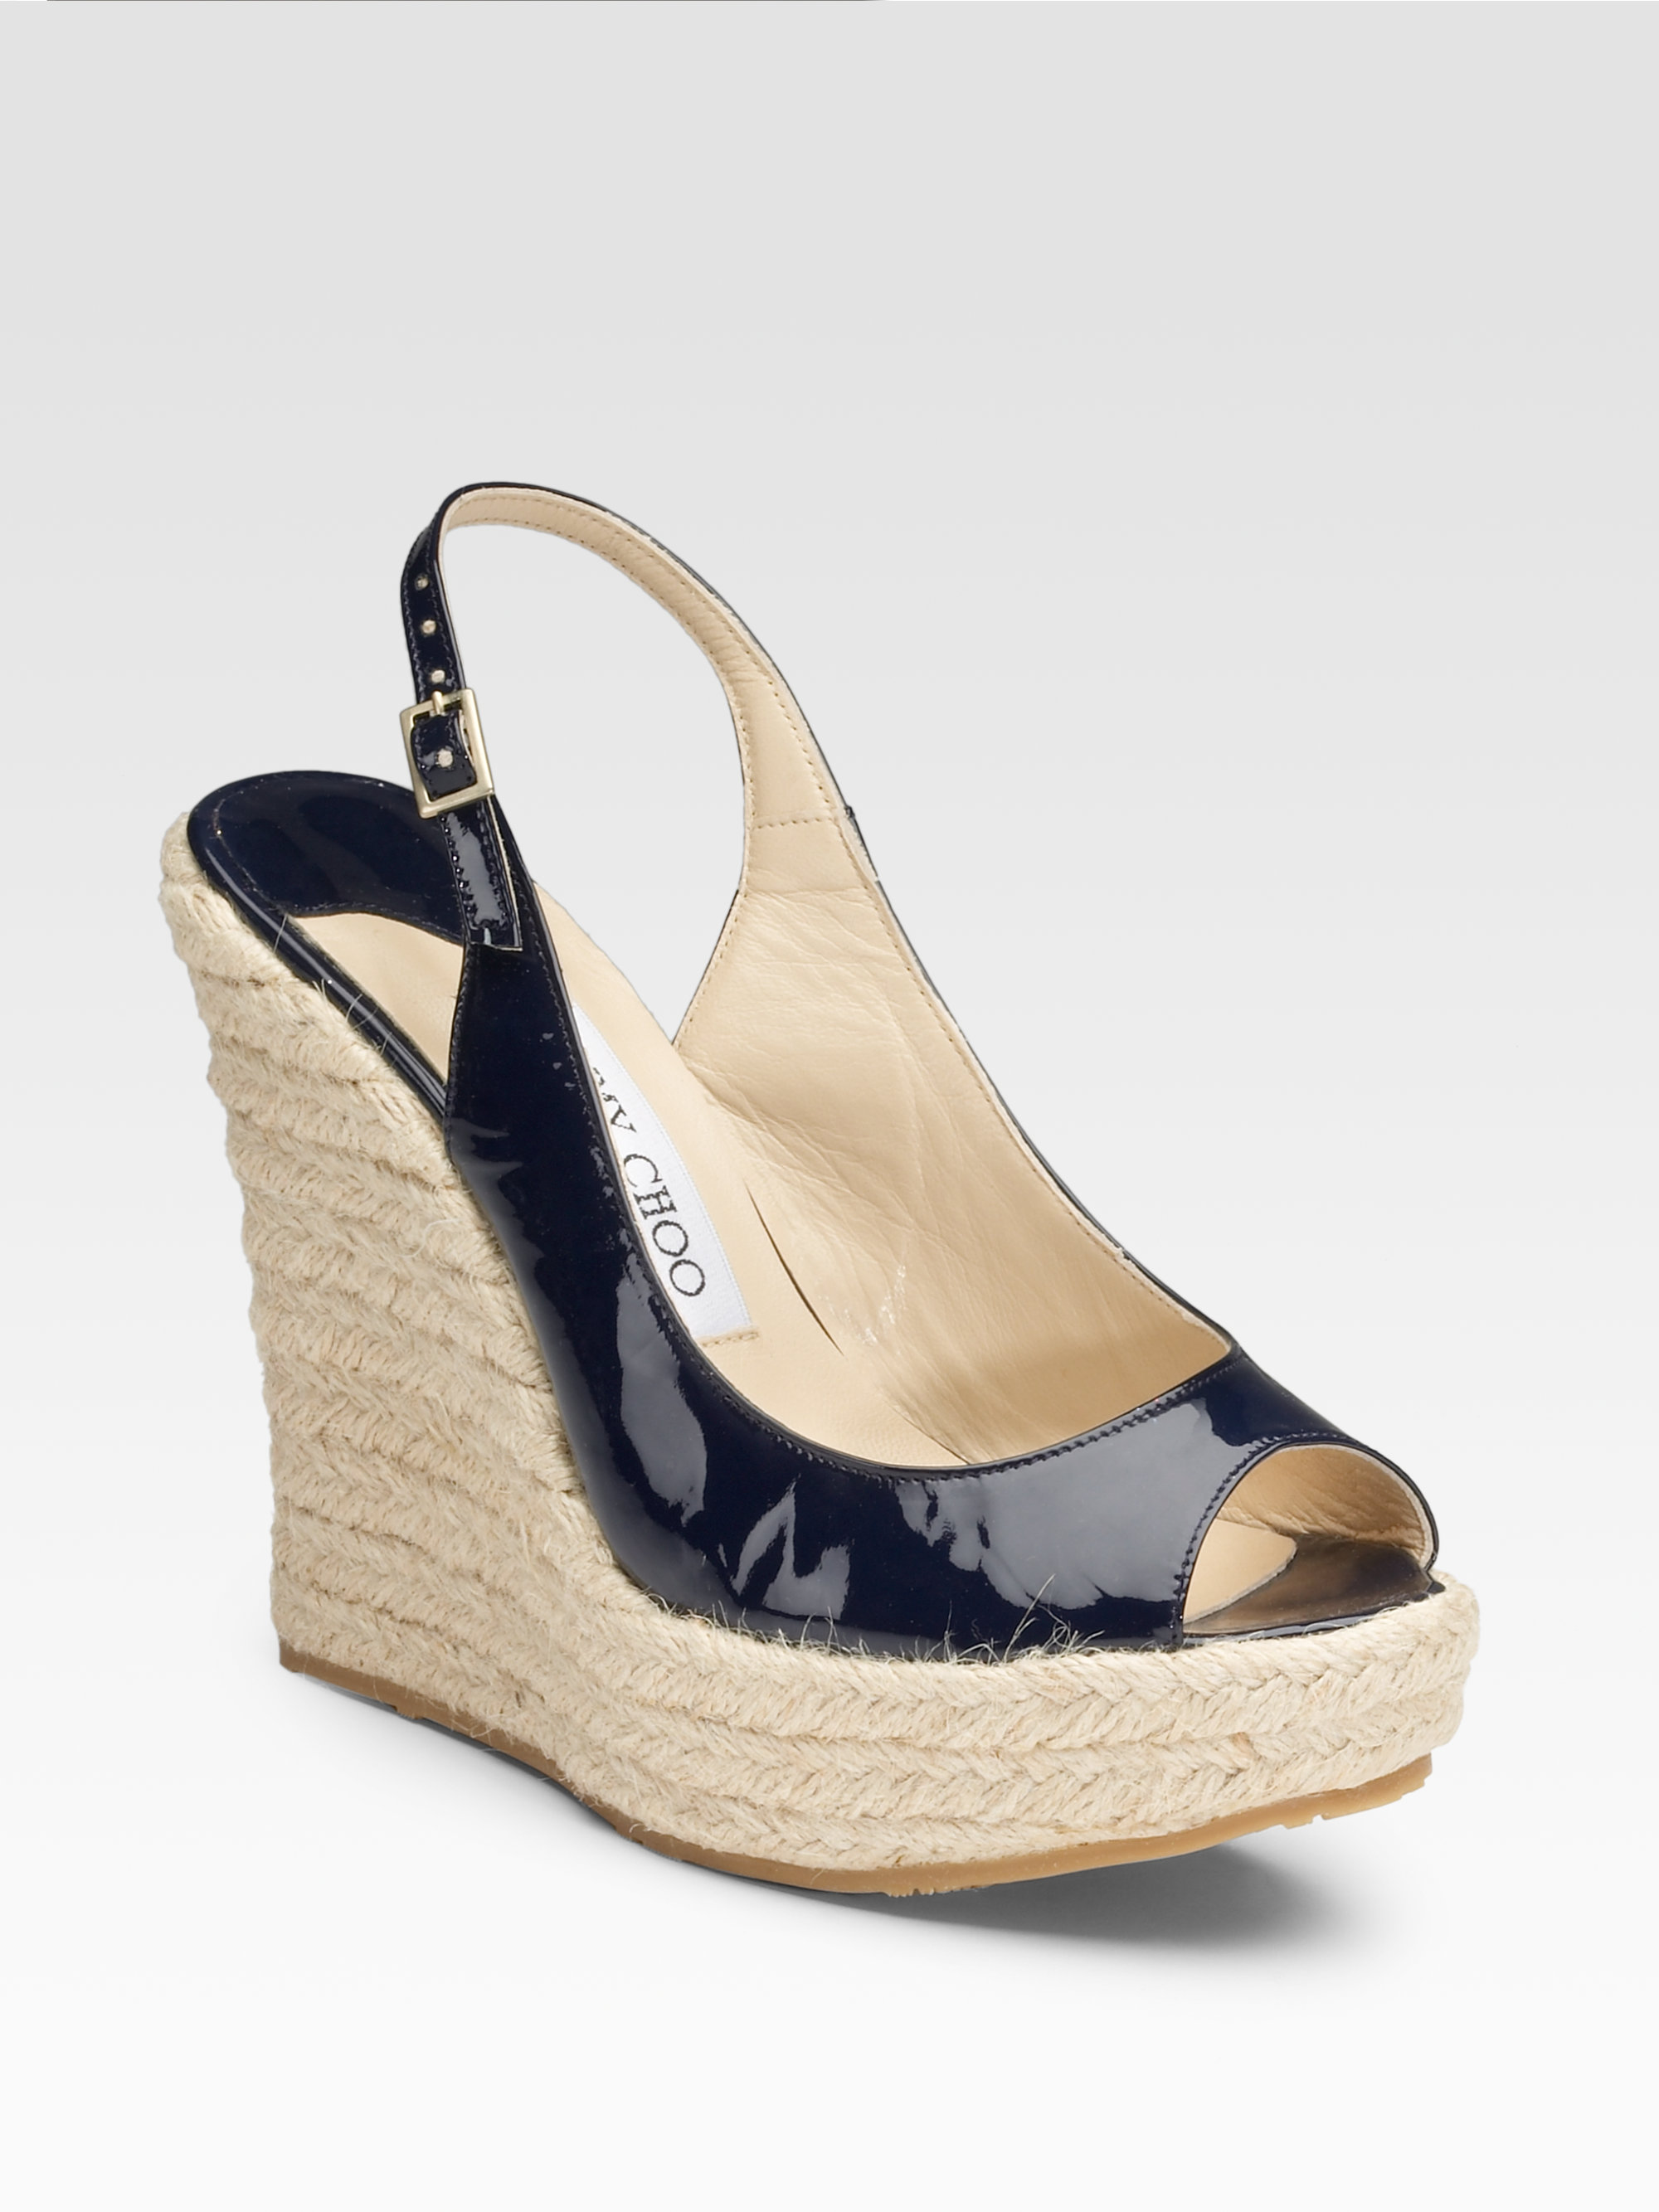 Jimmy Choo Polar Patent Leather Espadrilles in Blue (navy) | Lyst